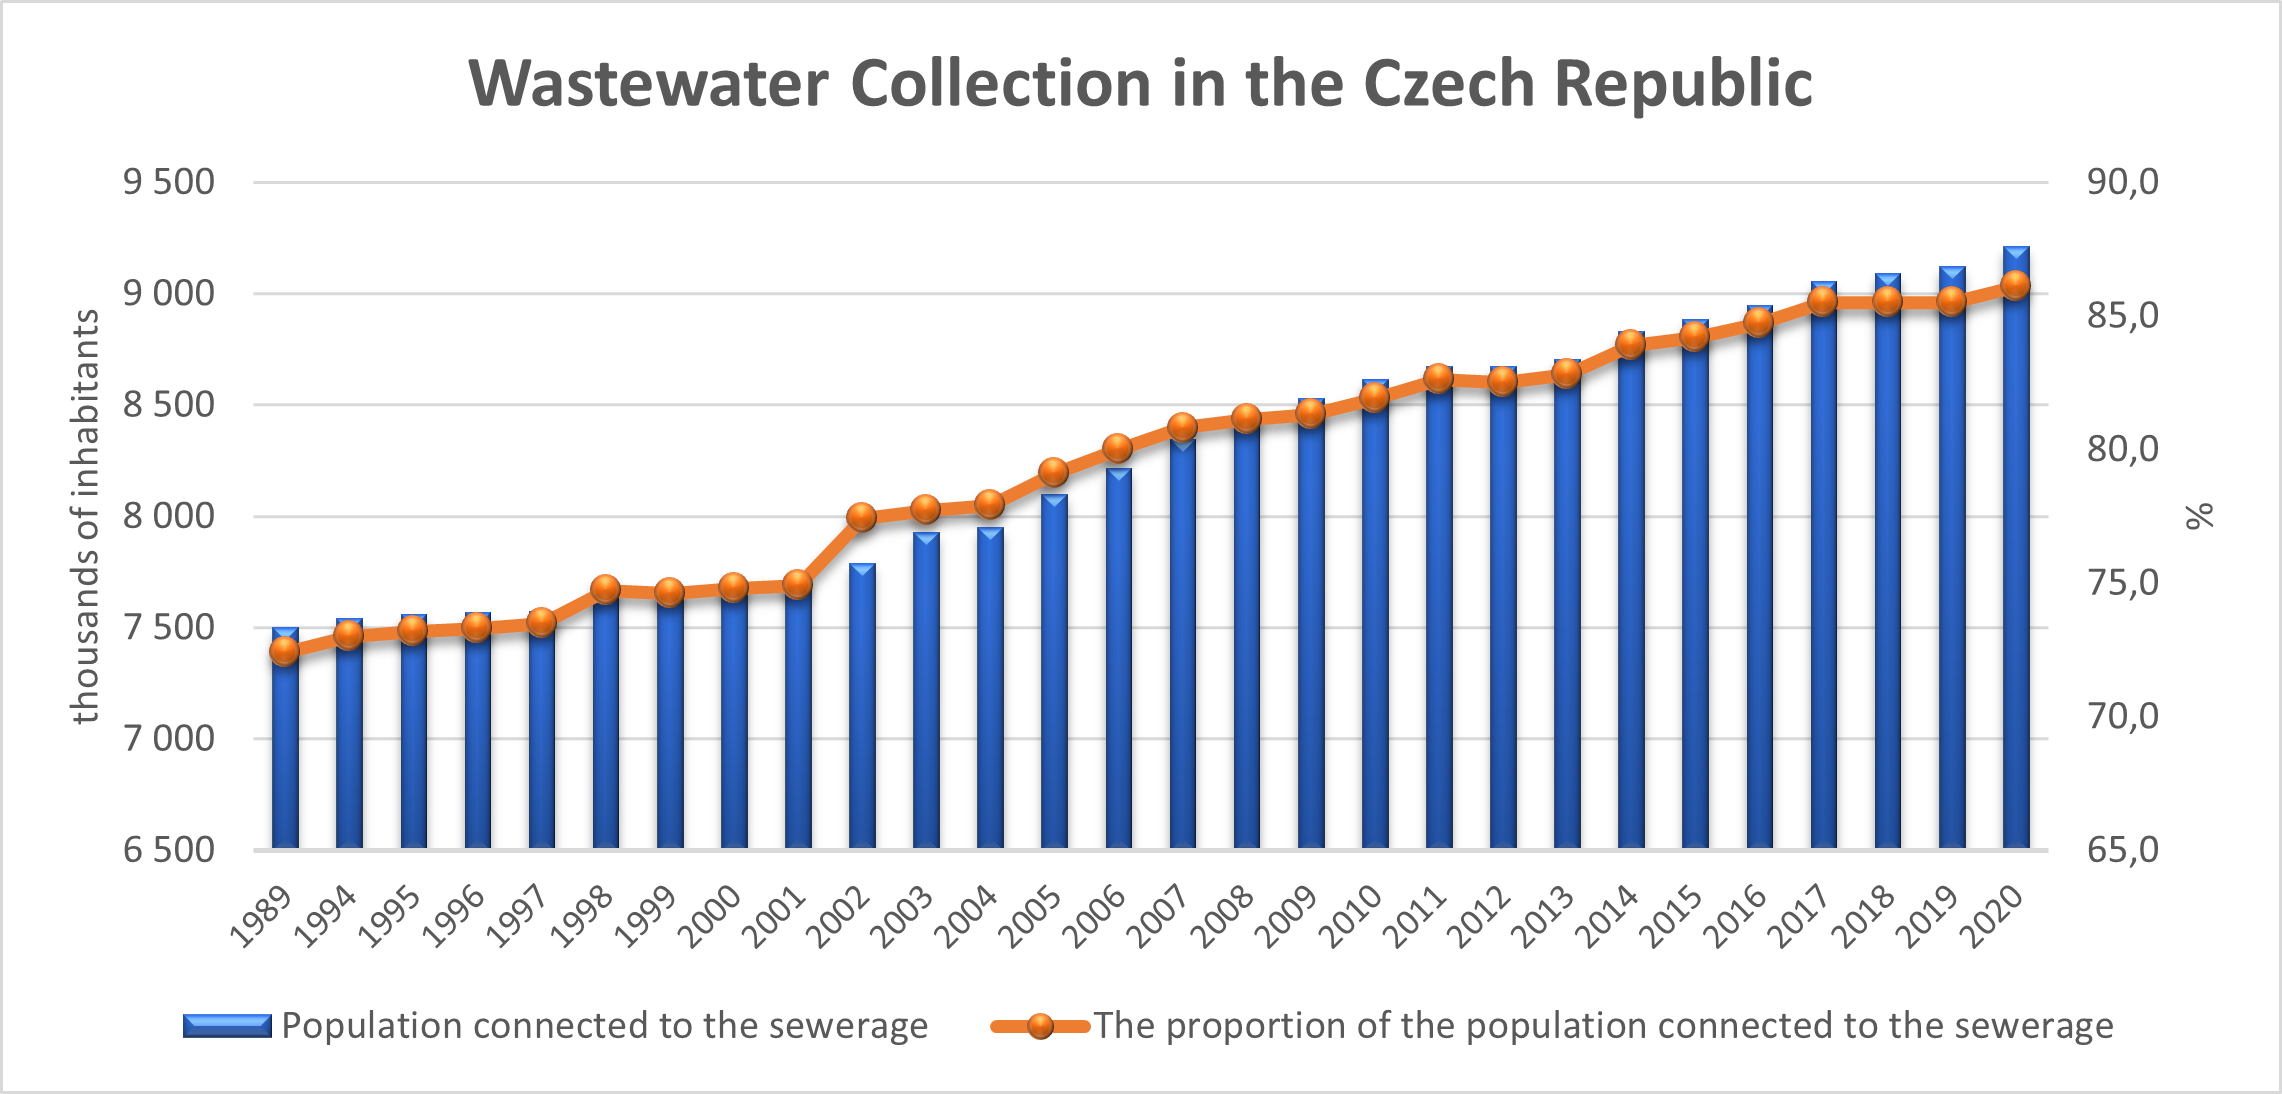 Wastewater Collection in the Czech Republic